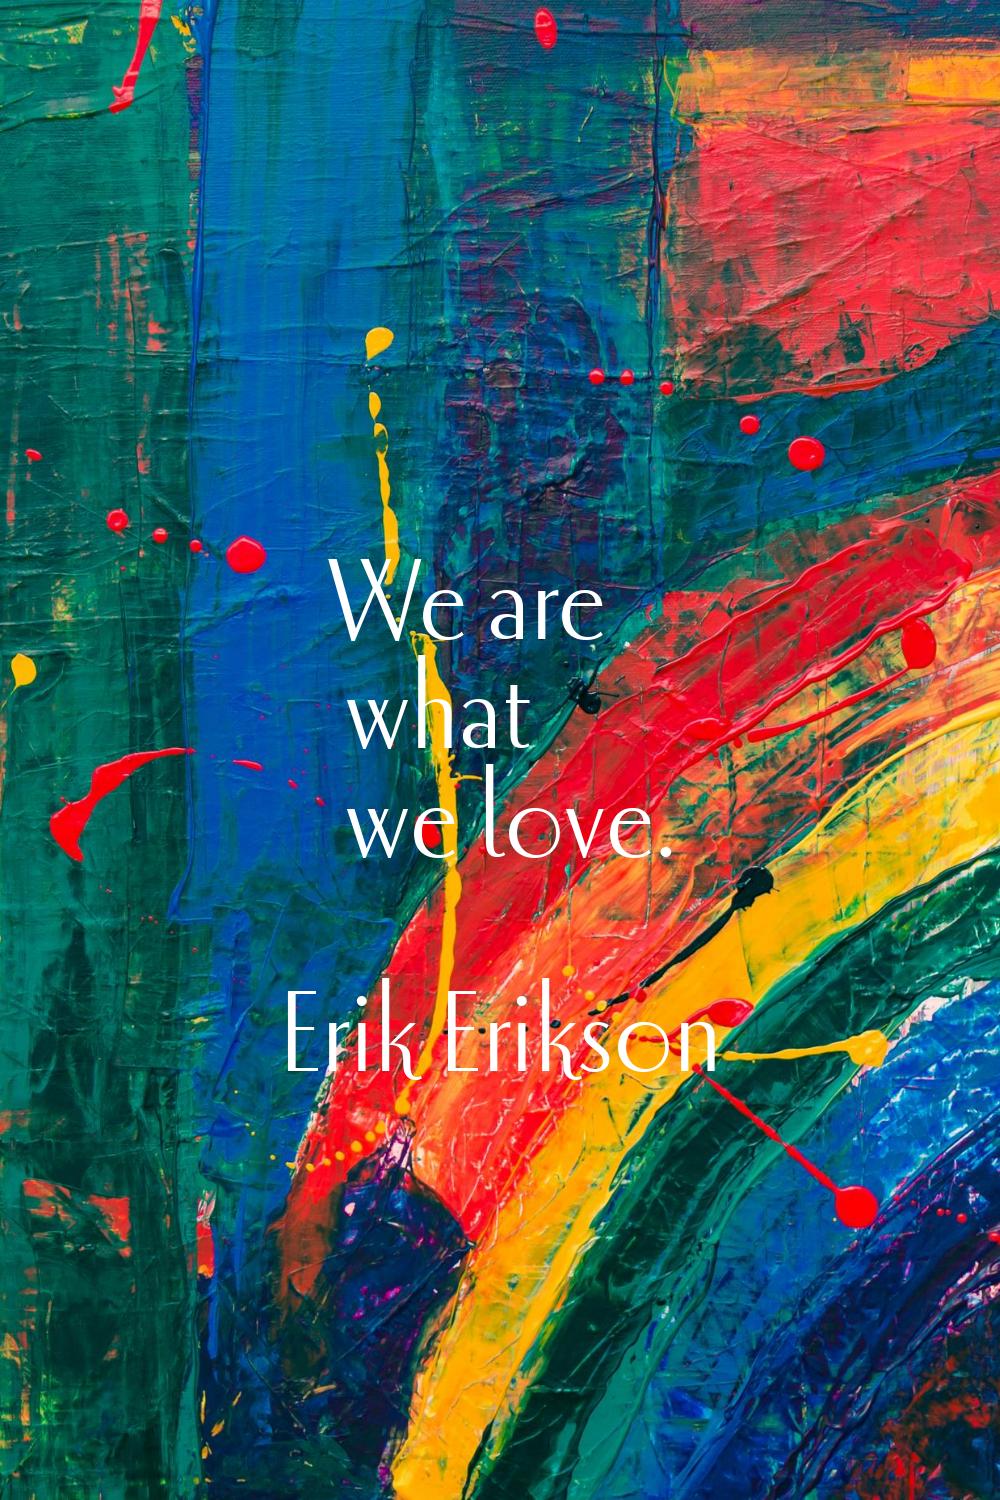 We are what we love.